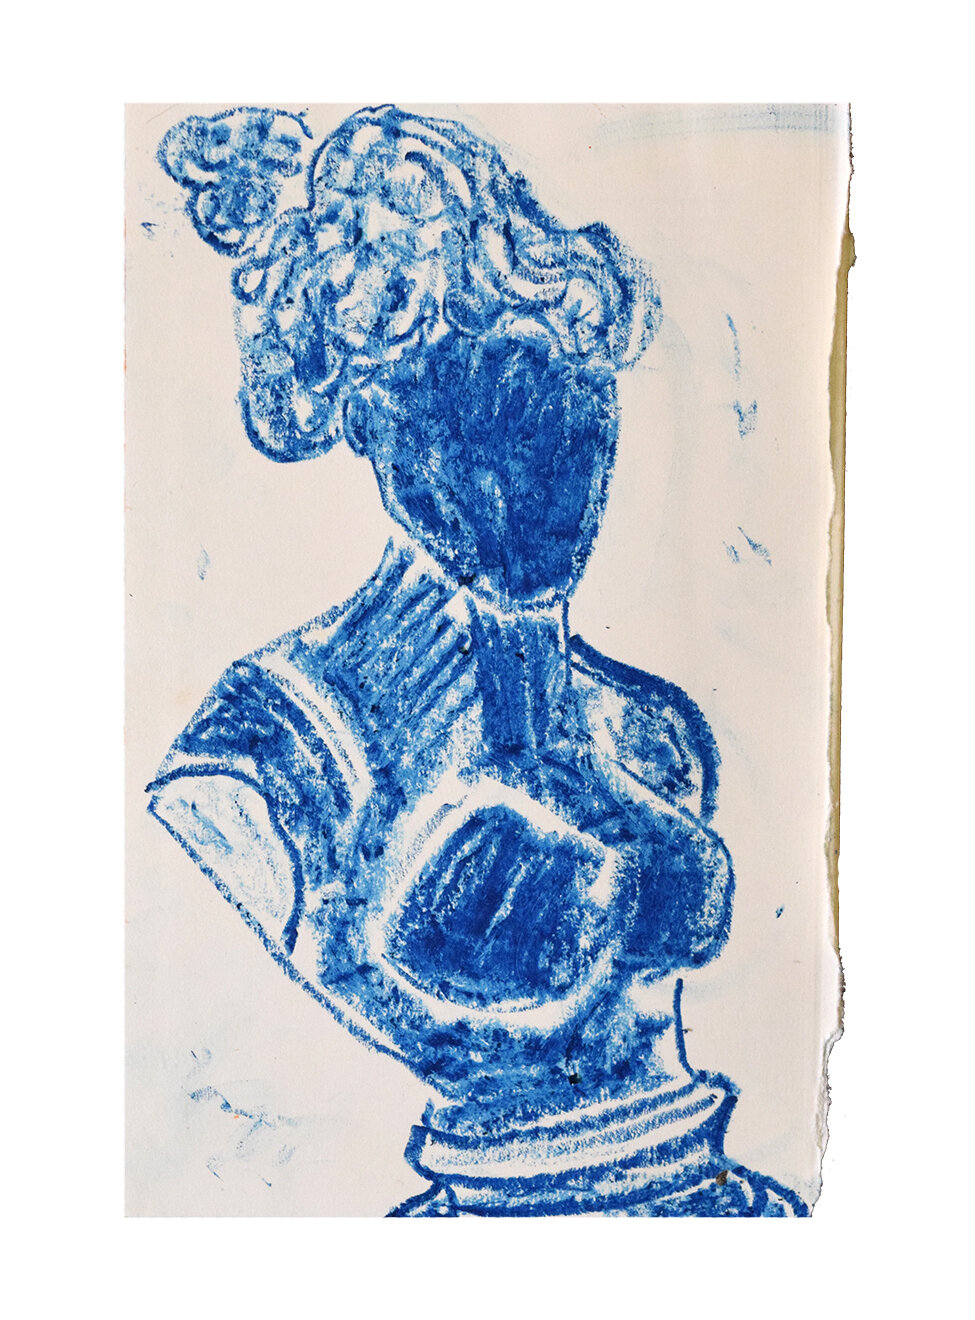 Bust, 2020, pastel on book paper